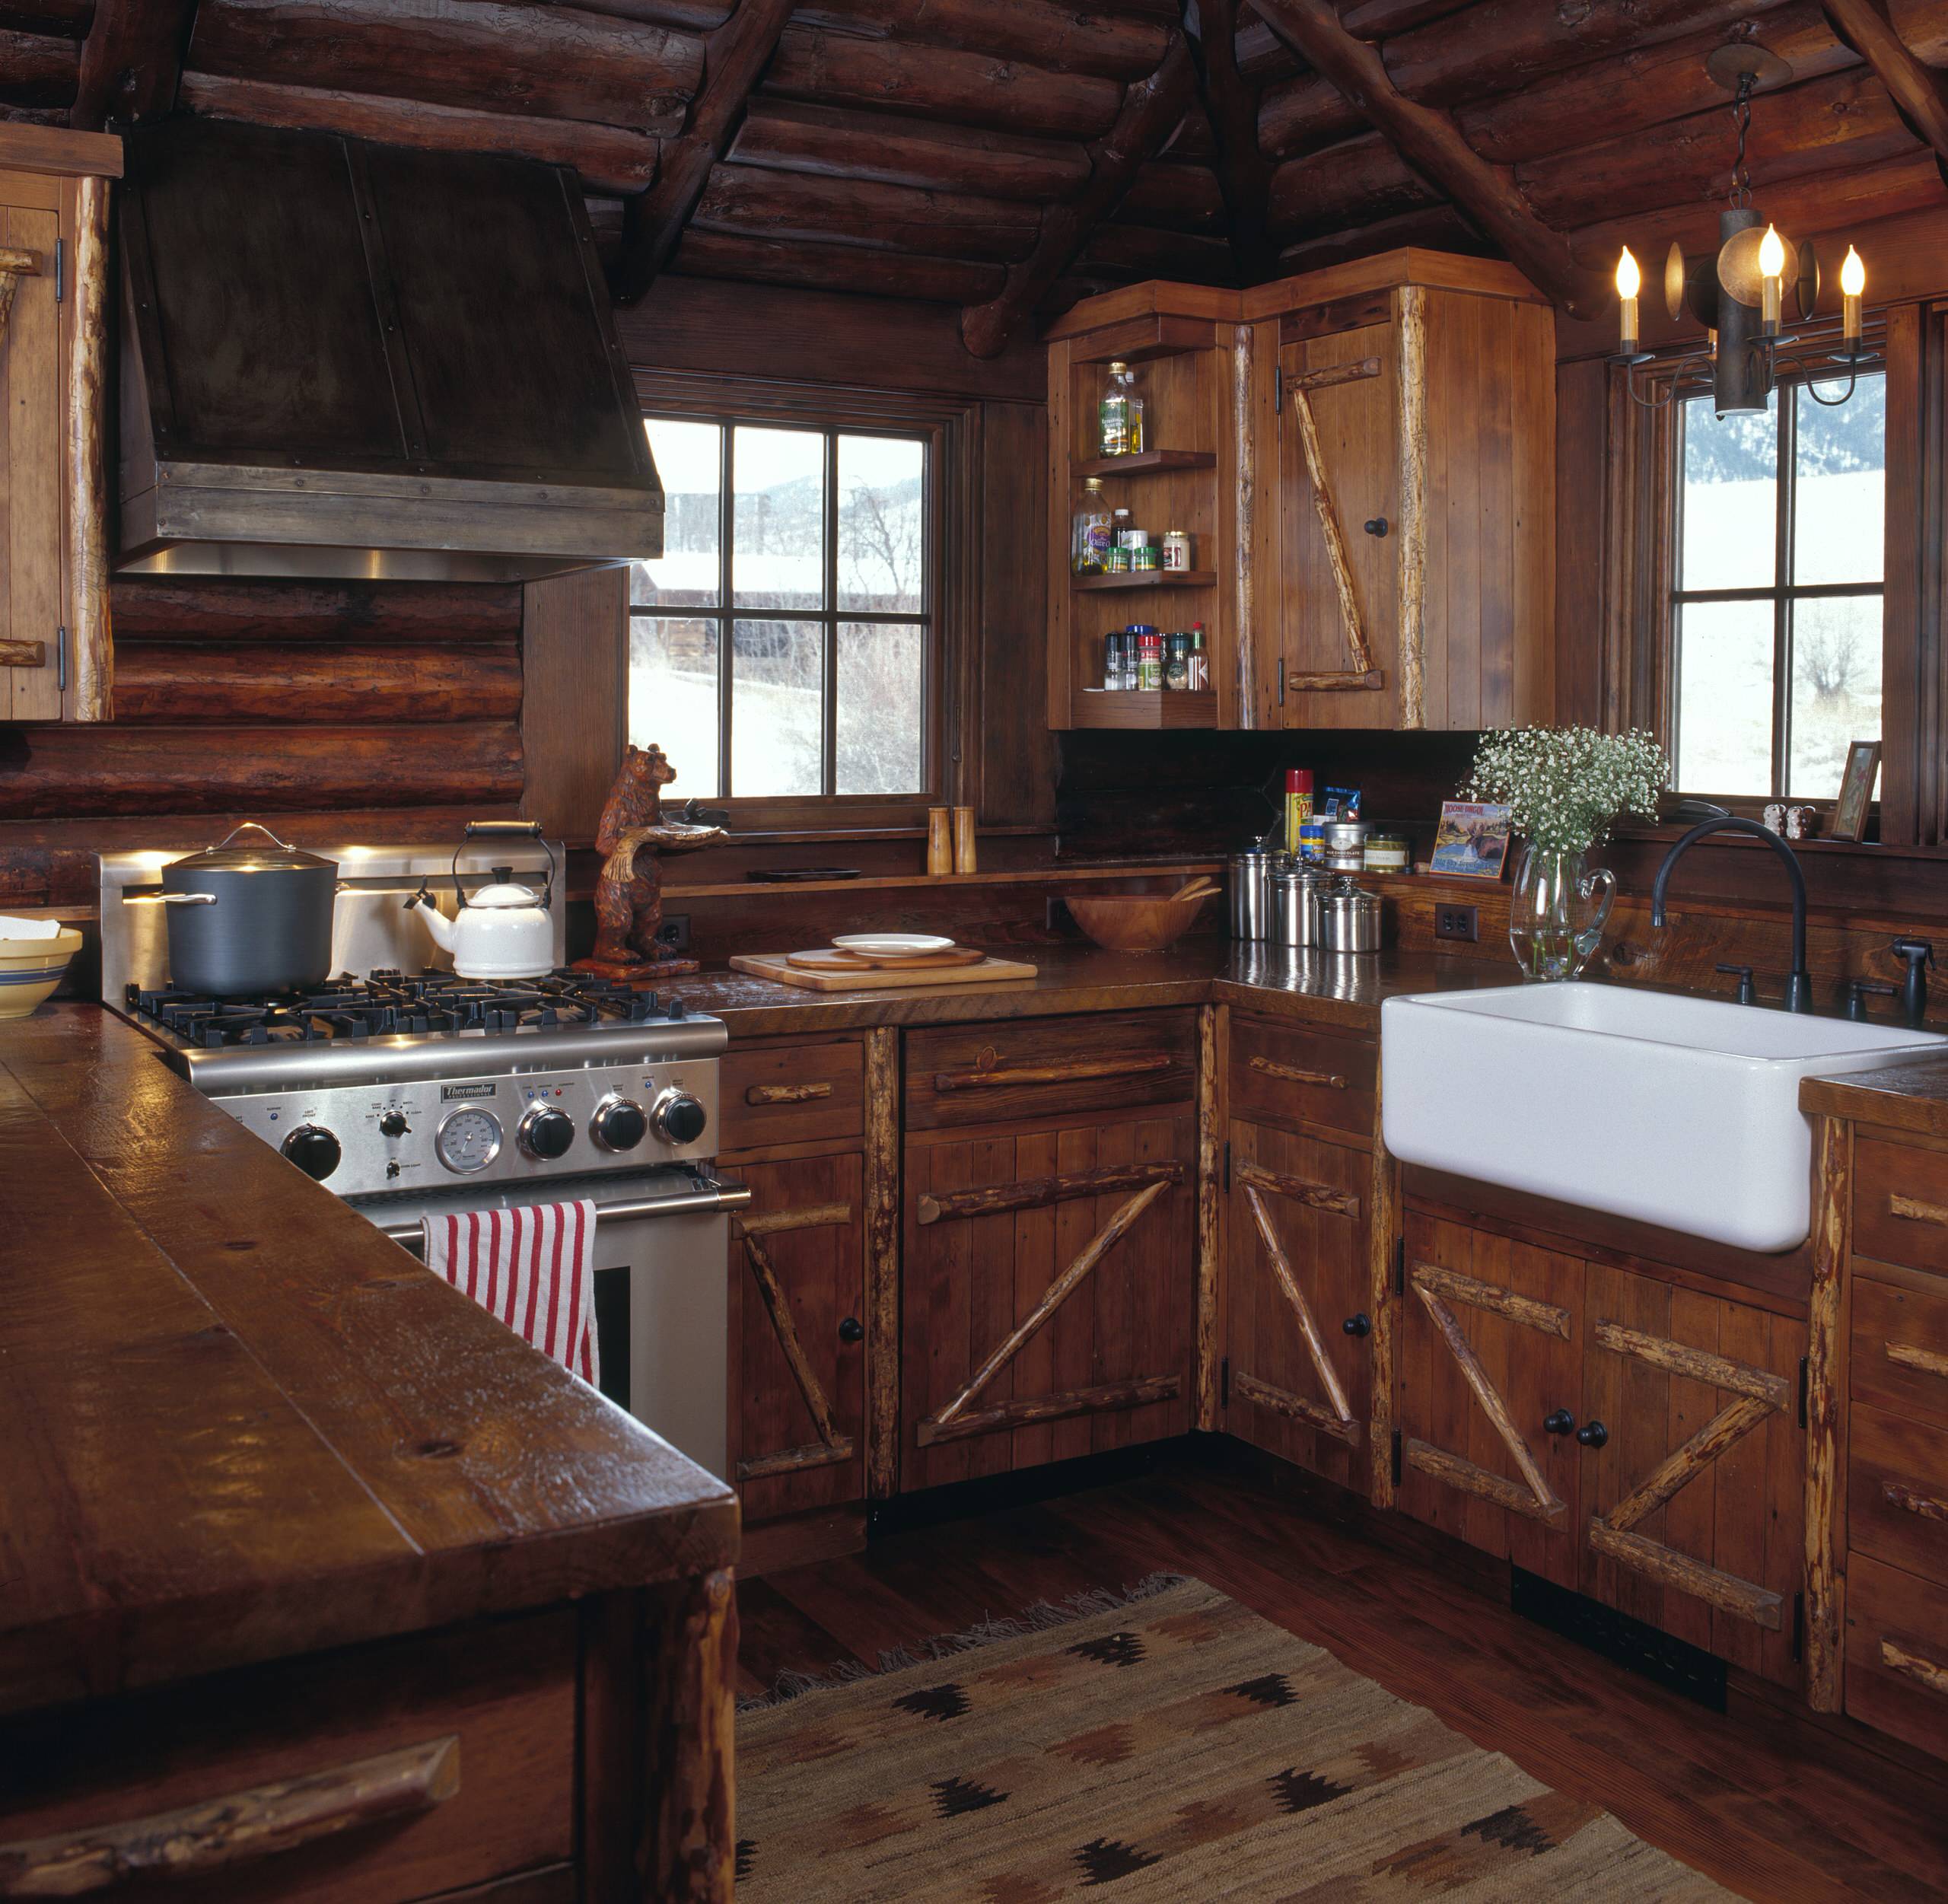 Secluded Lake Cabin Yellowstone Traditions Img~bfa1c7ae0cfffd9f 14 9137 1 316d7e0 